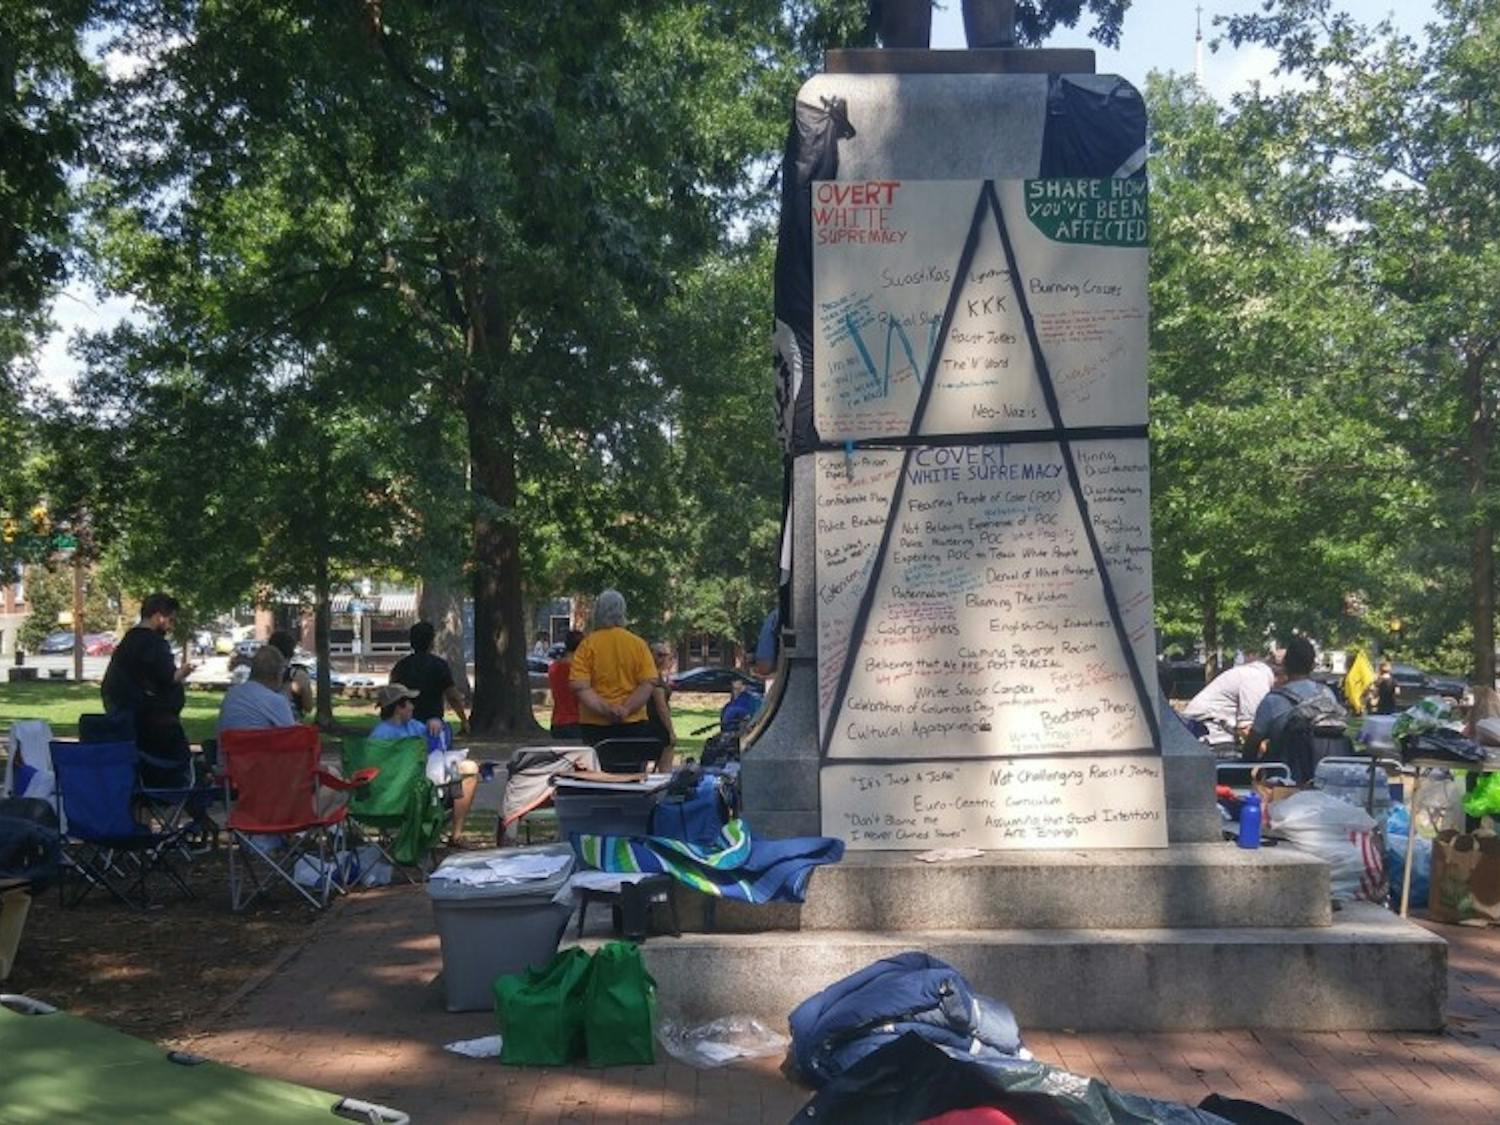 Pro-Confederate counter-protestors showed up at a sit-in in front of Silent Sam on Saturday.